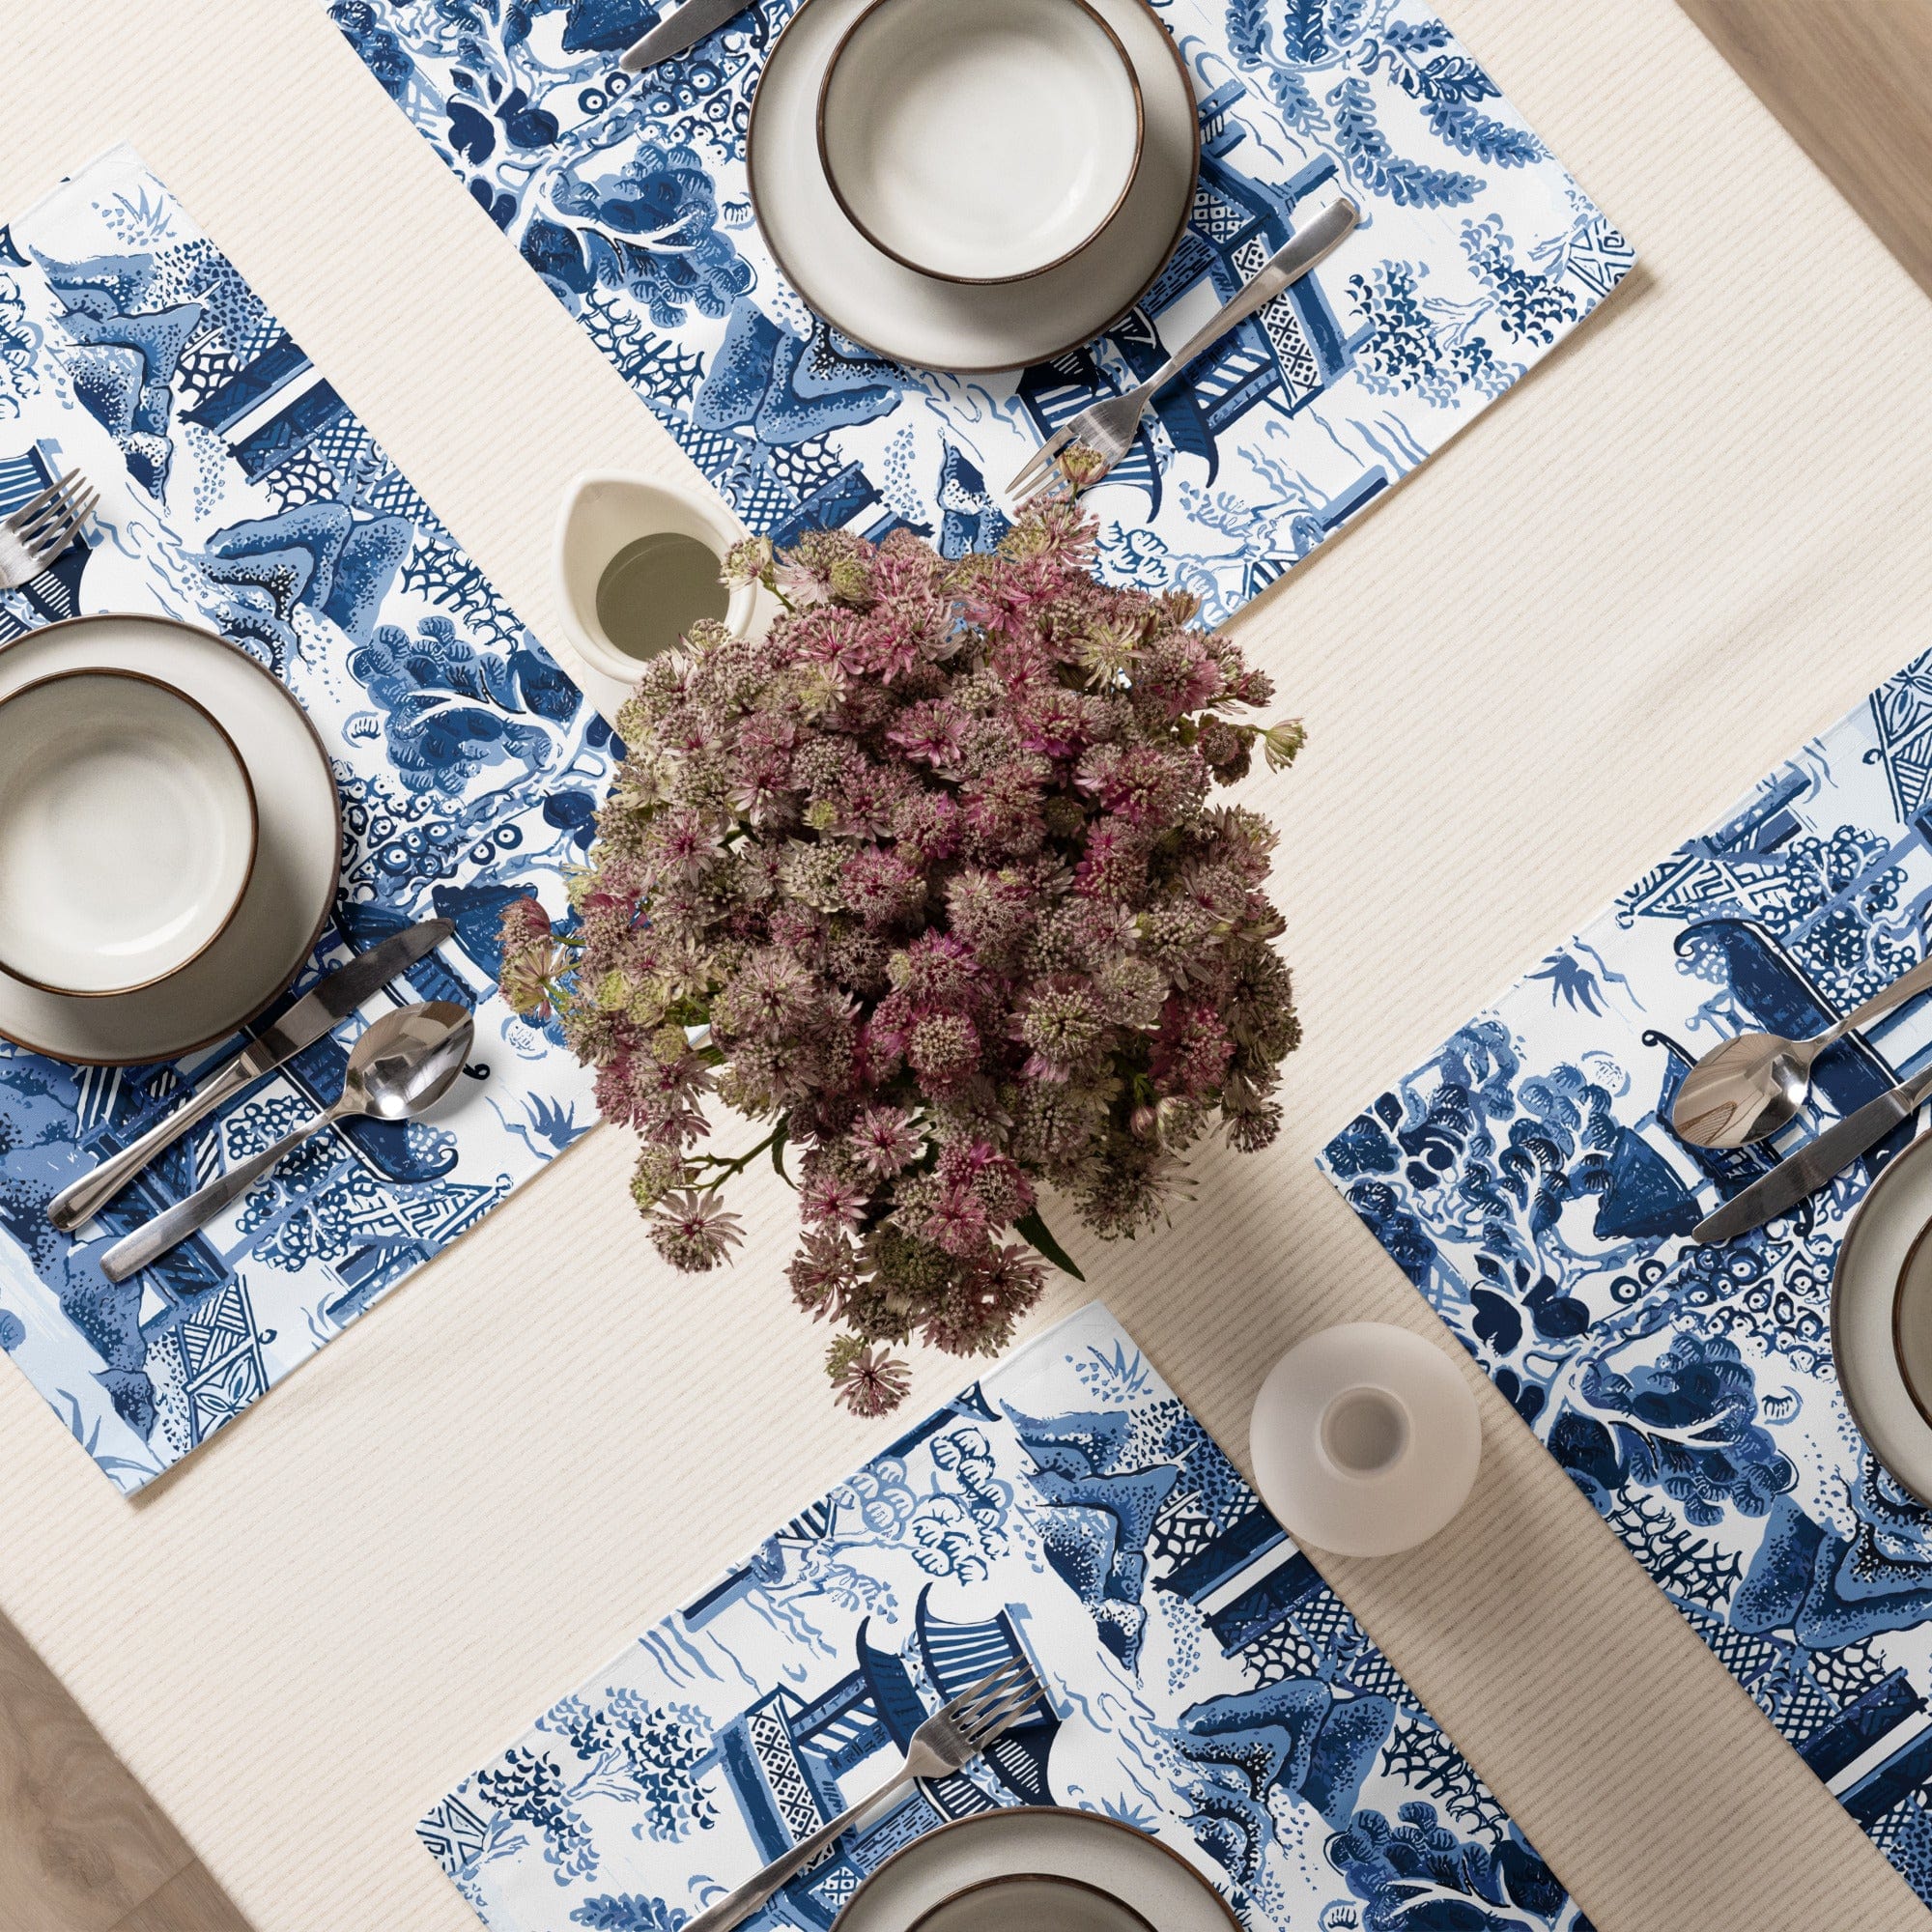 Kate McEnroe New York Set of 4 Chinoiserie Peacock Placemats, Blue and White Floral Print, Elegant Table Linens, Oriental Bird Design, Chic Dining Decor Placemats 6439711_17484